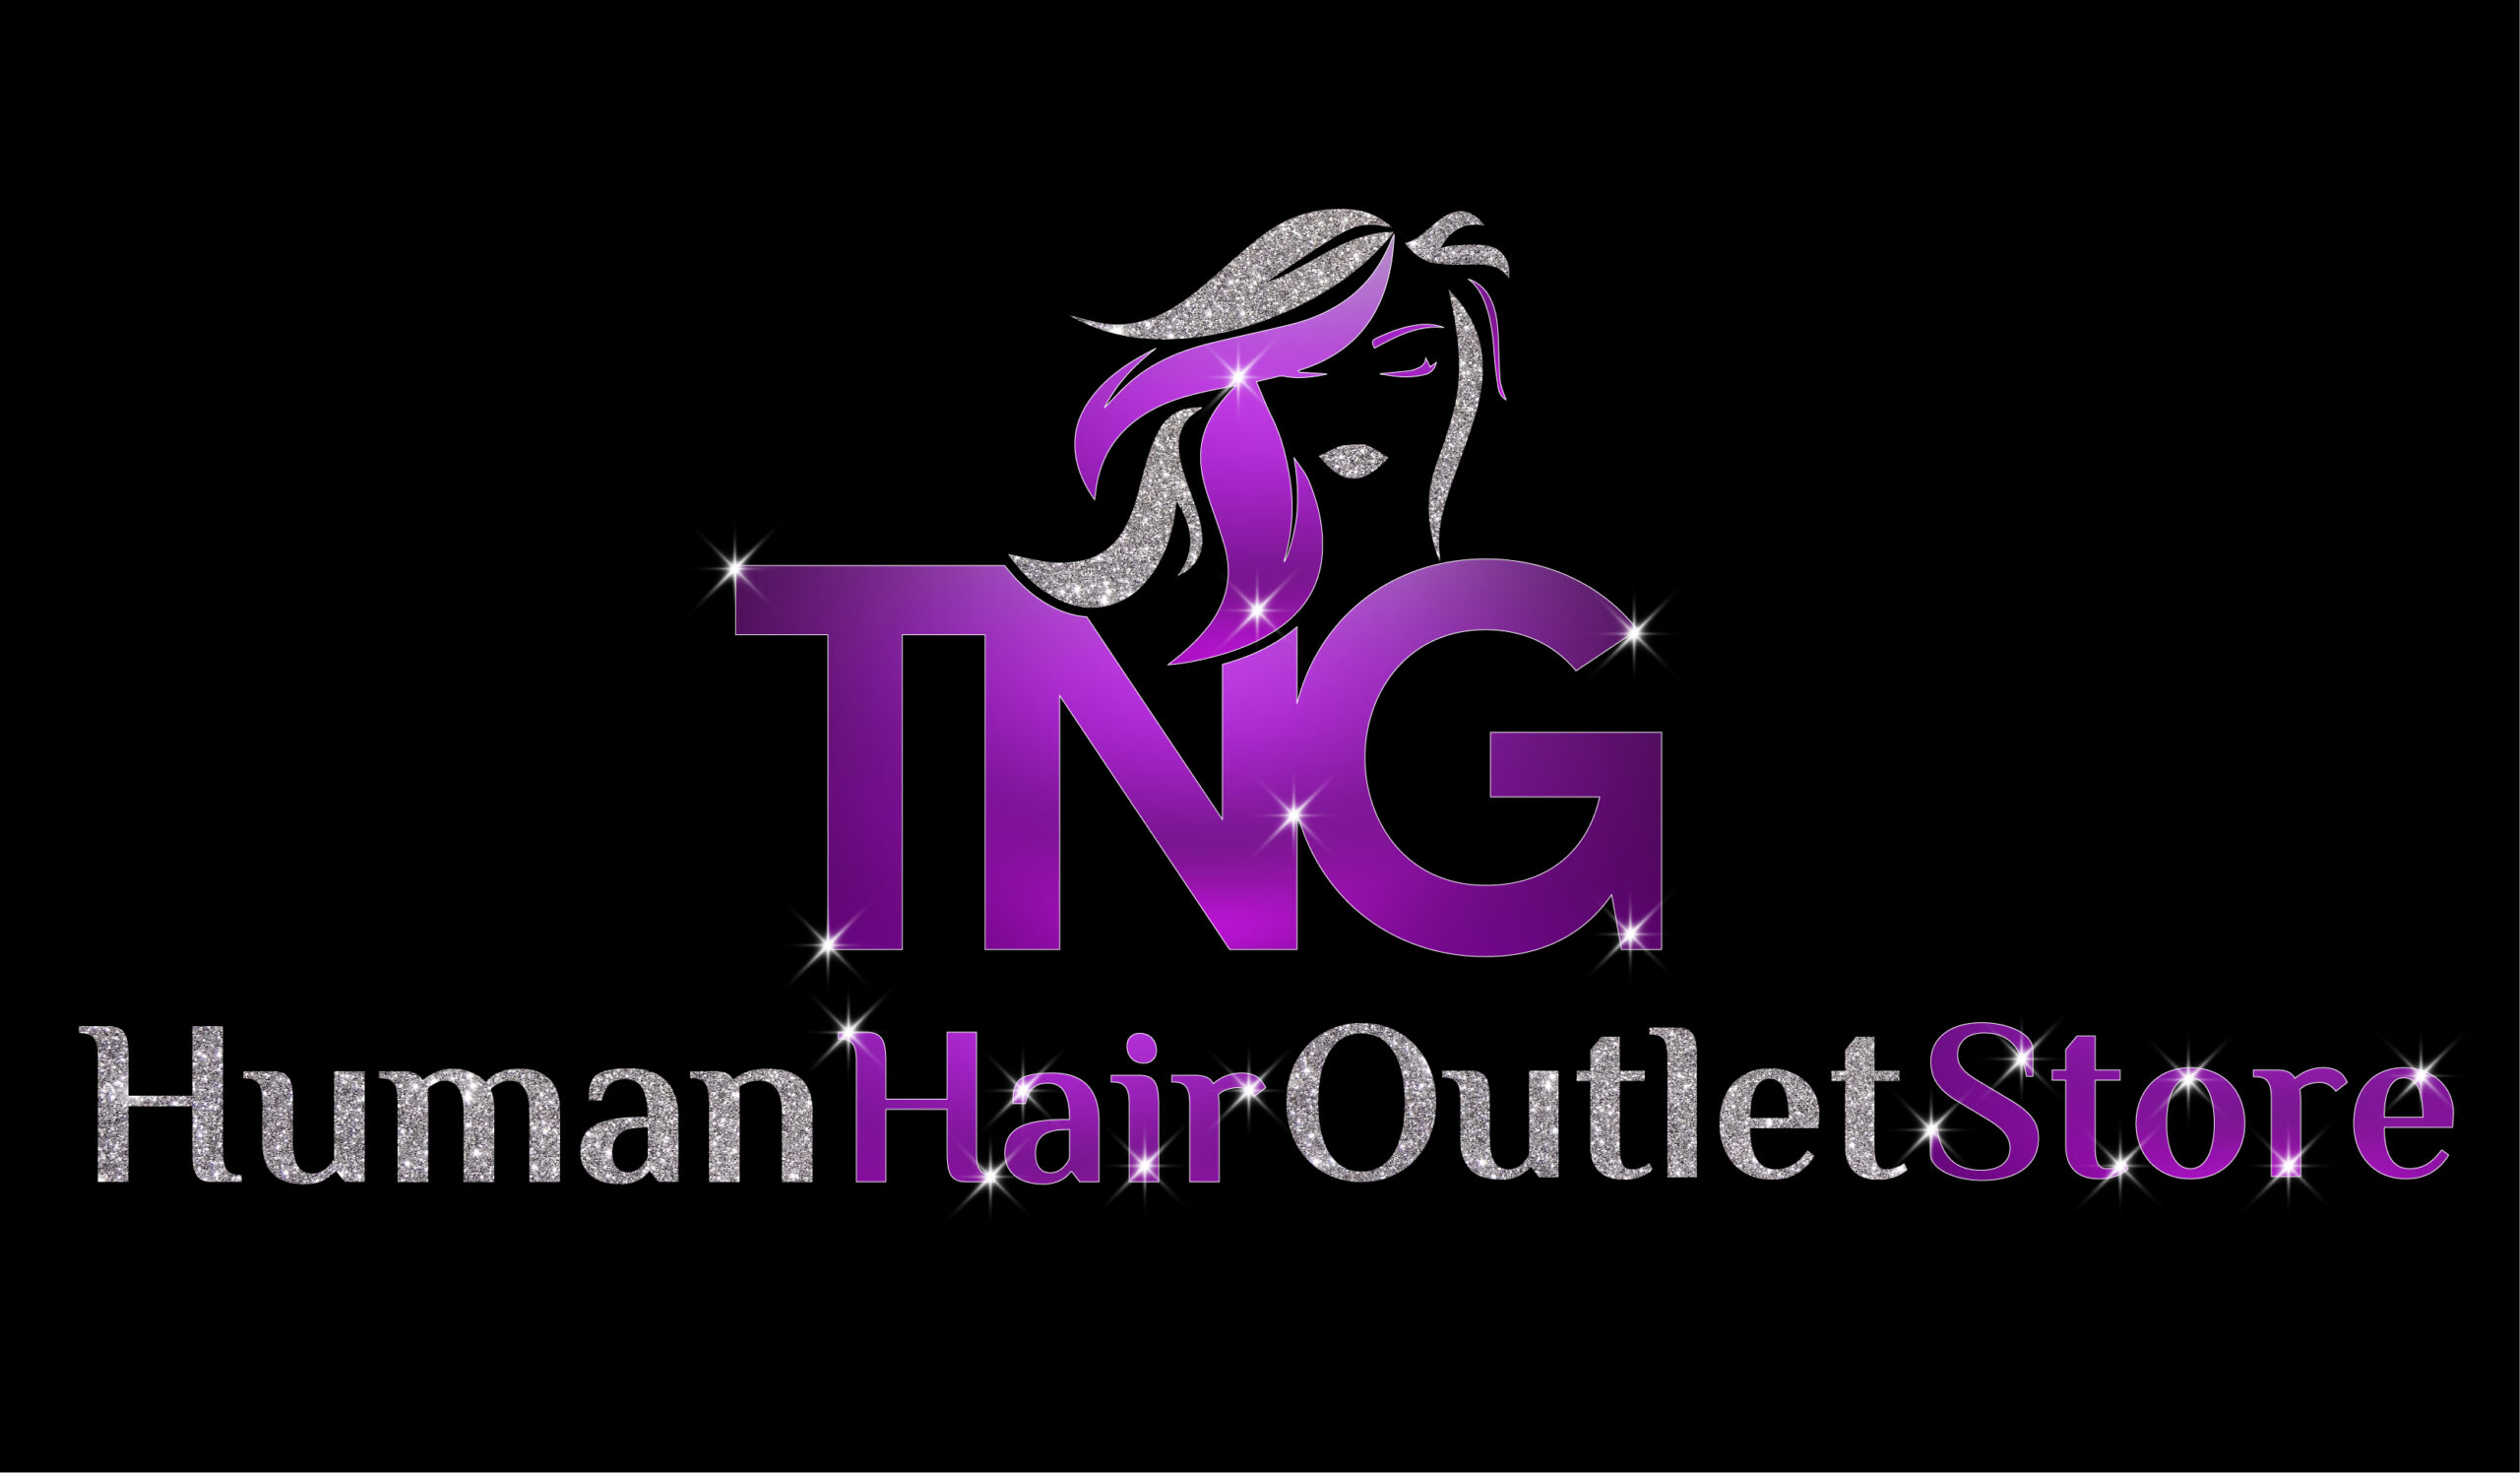 TNG Human Hair Outlet Store